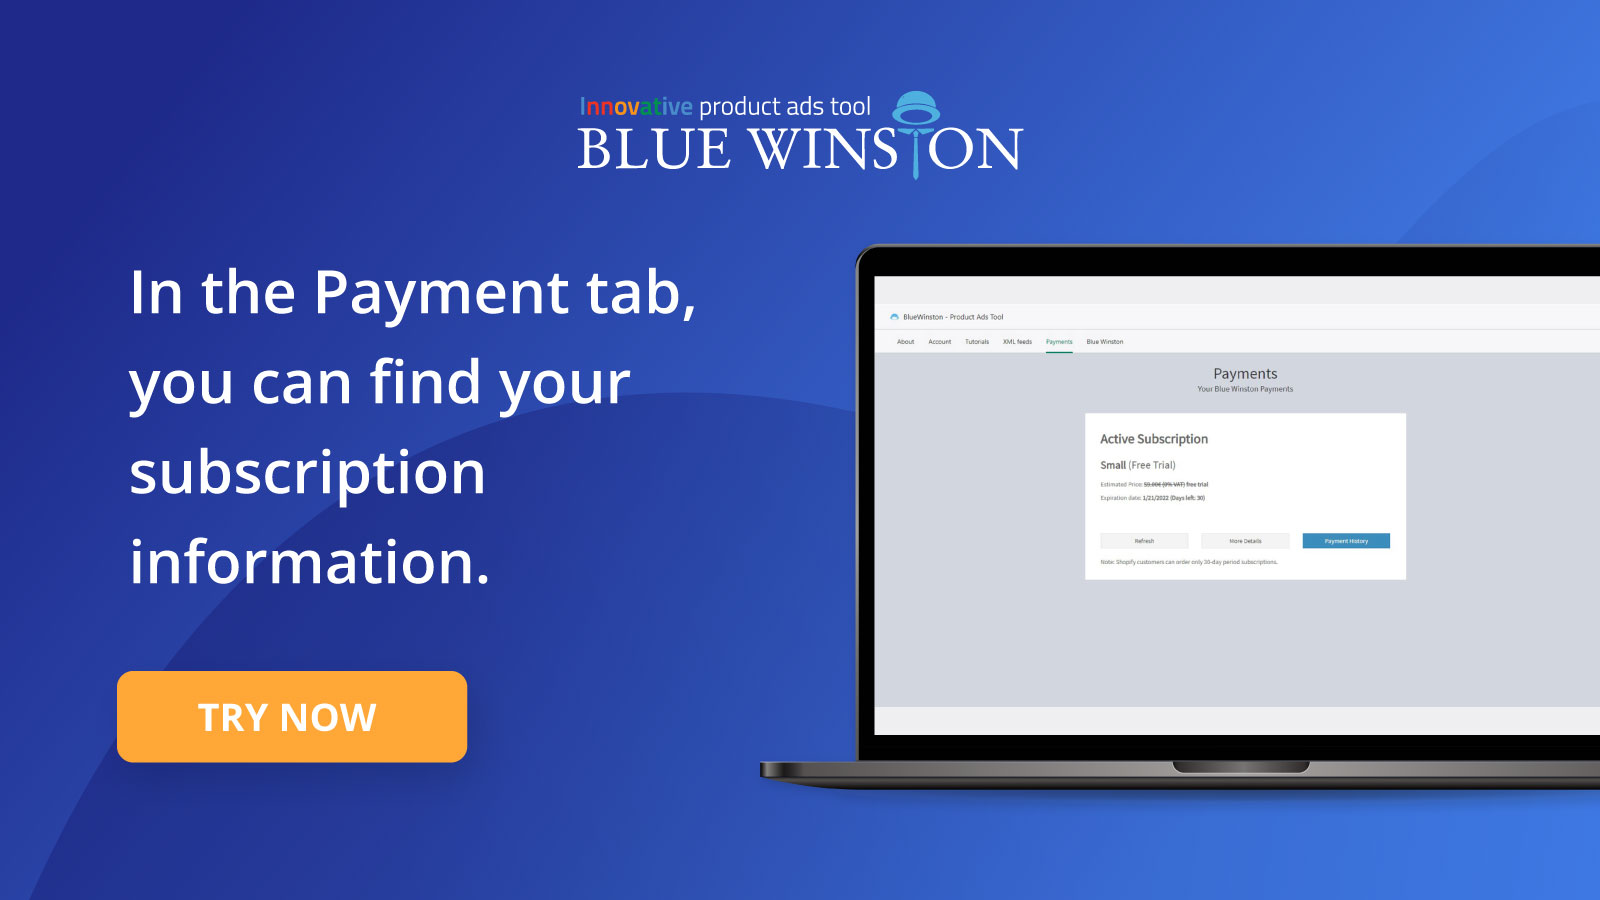 In the Payment tab, you can find your subscription information.